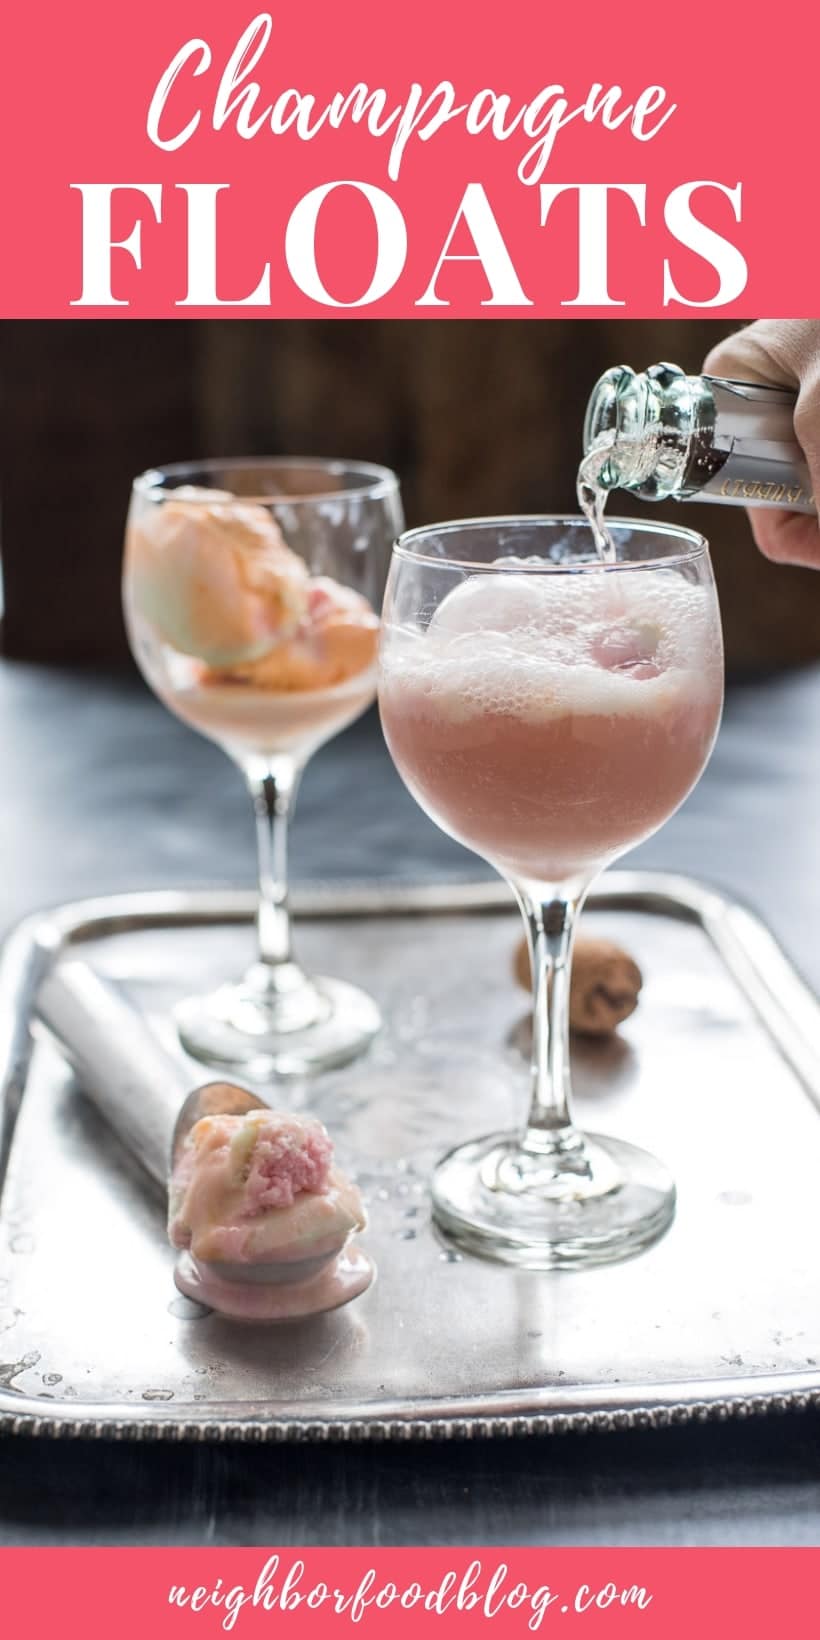 champagne floats with bottle pouring bubbly champagne over sherbet